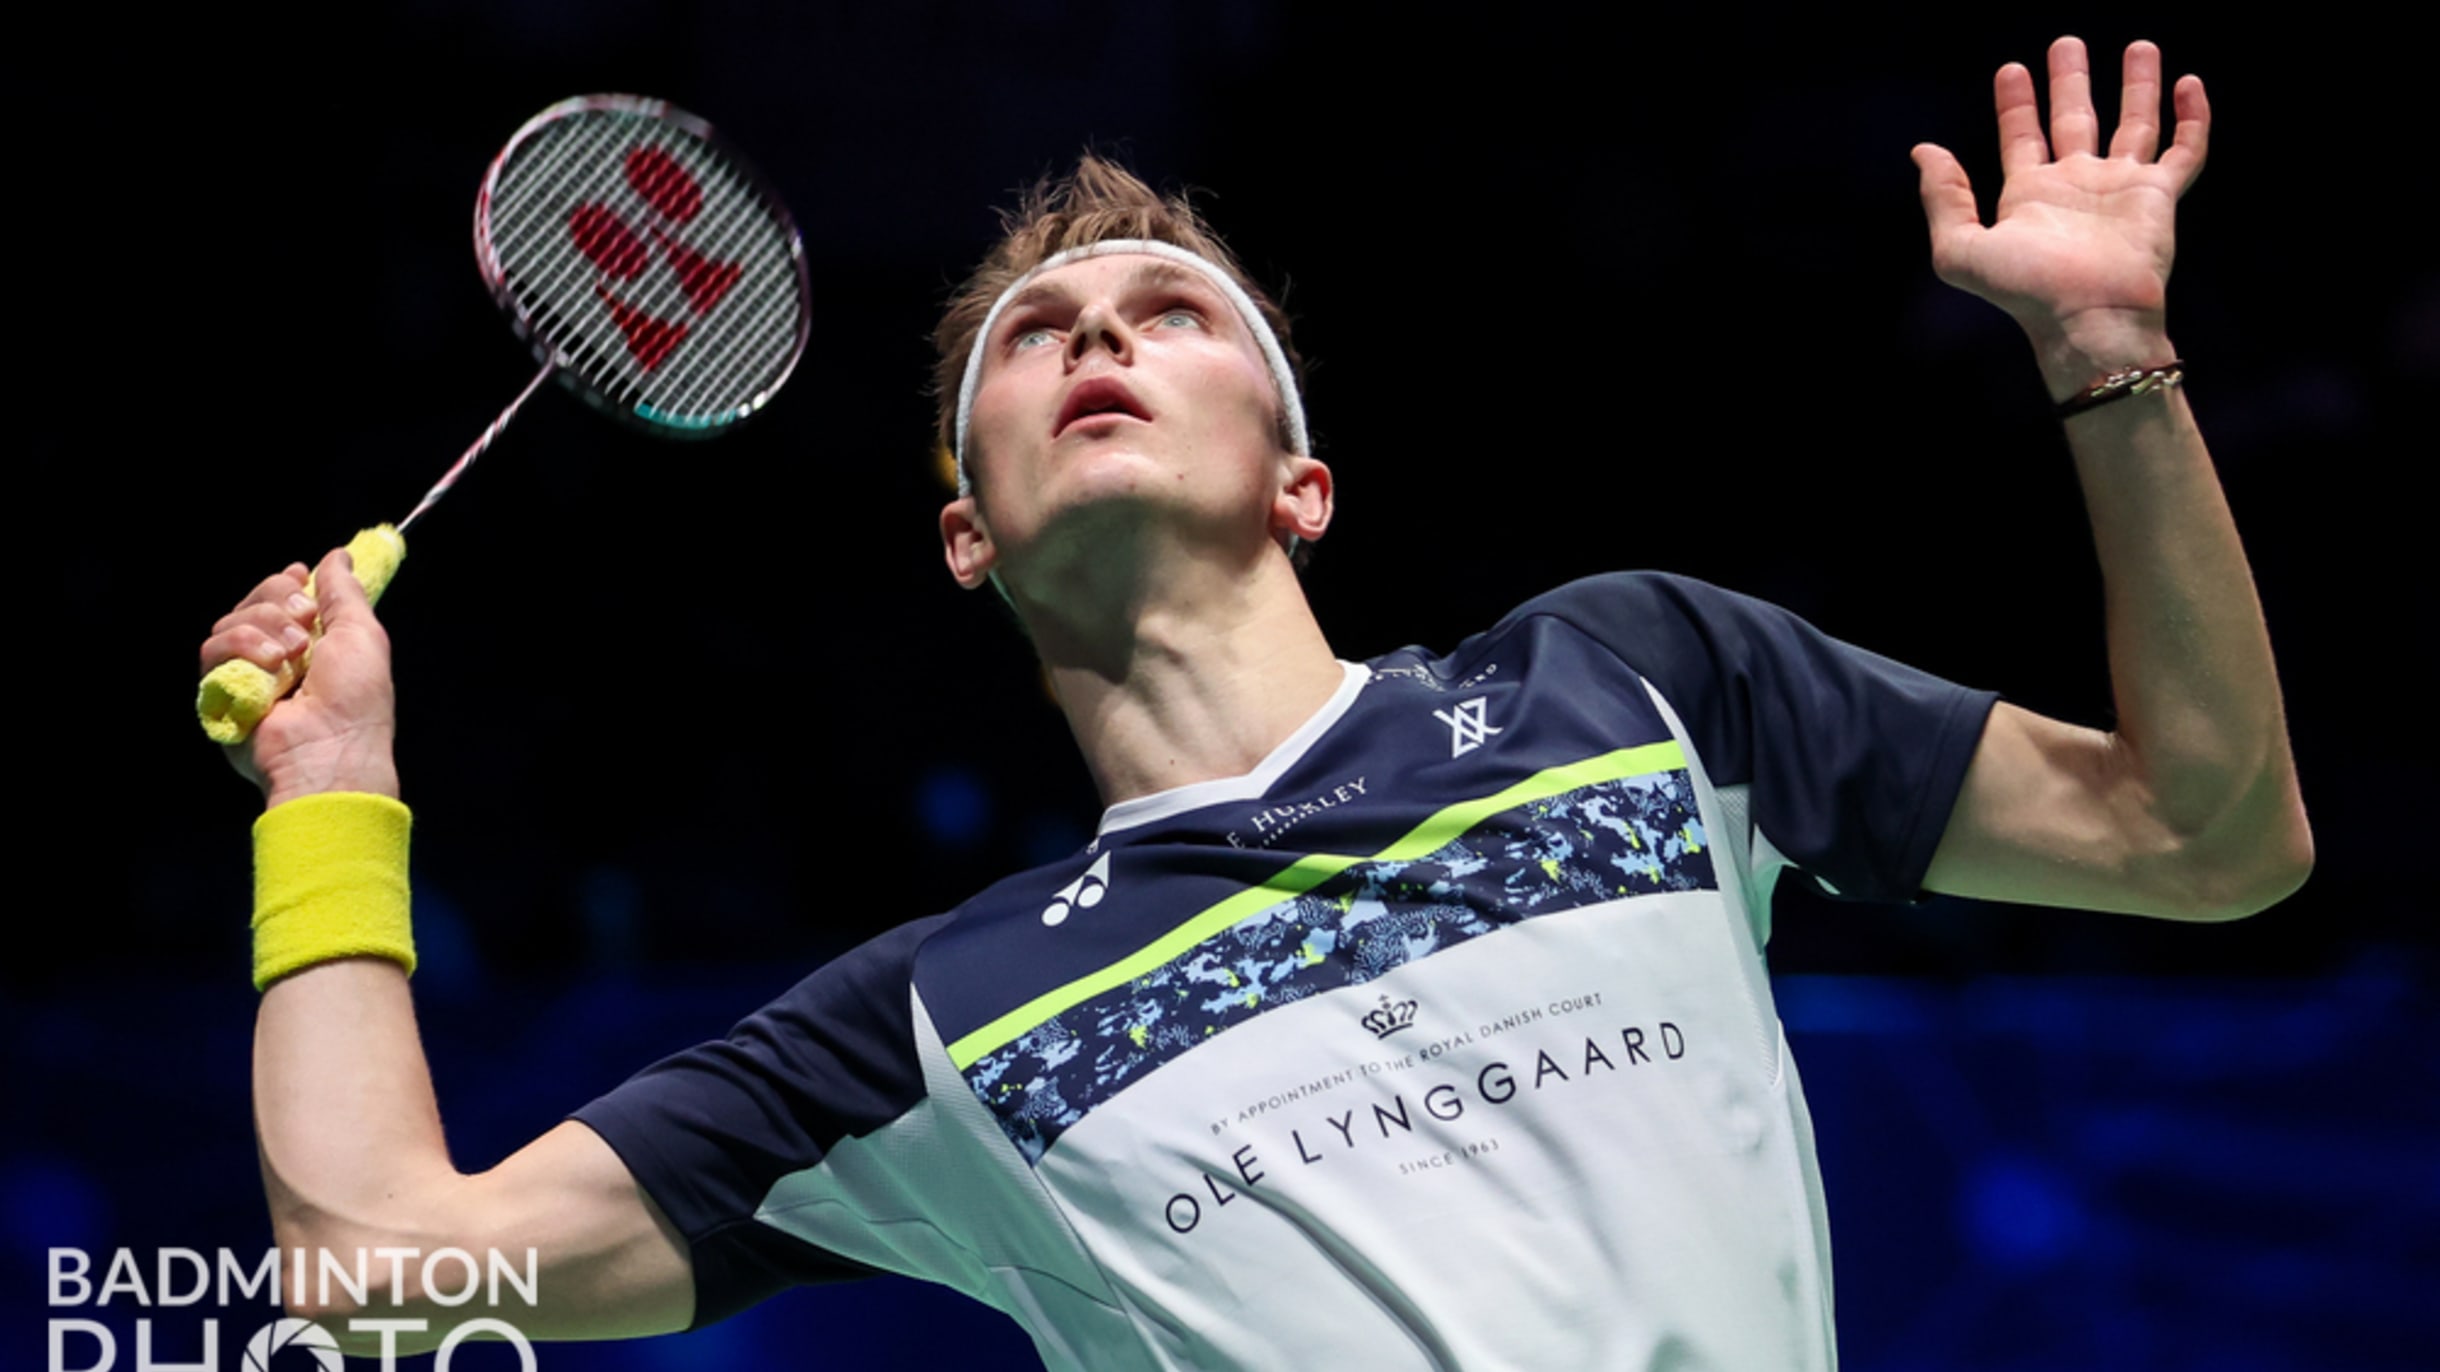 All England Open Badminton Championships 2022: Axelsen triumph on a big day too for Indonesia's double winners - How it happened